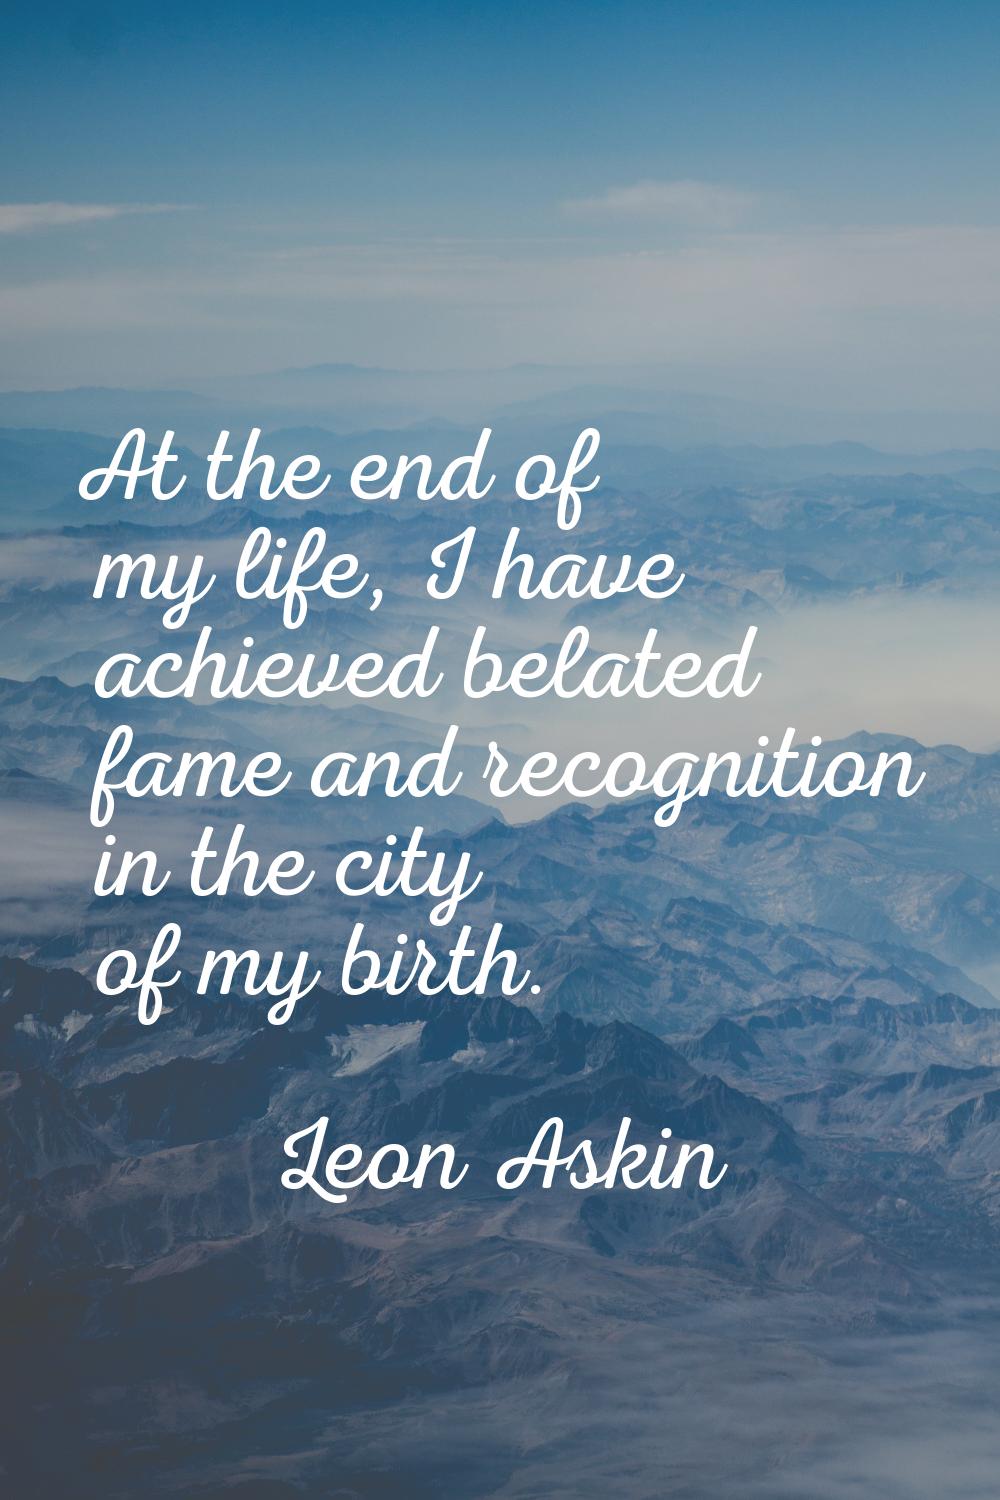 At the end of my life, I have achieved belated fame and recognition in the city of my birth.